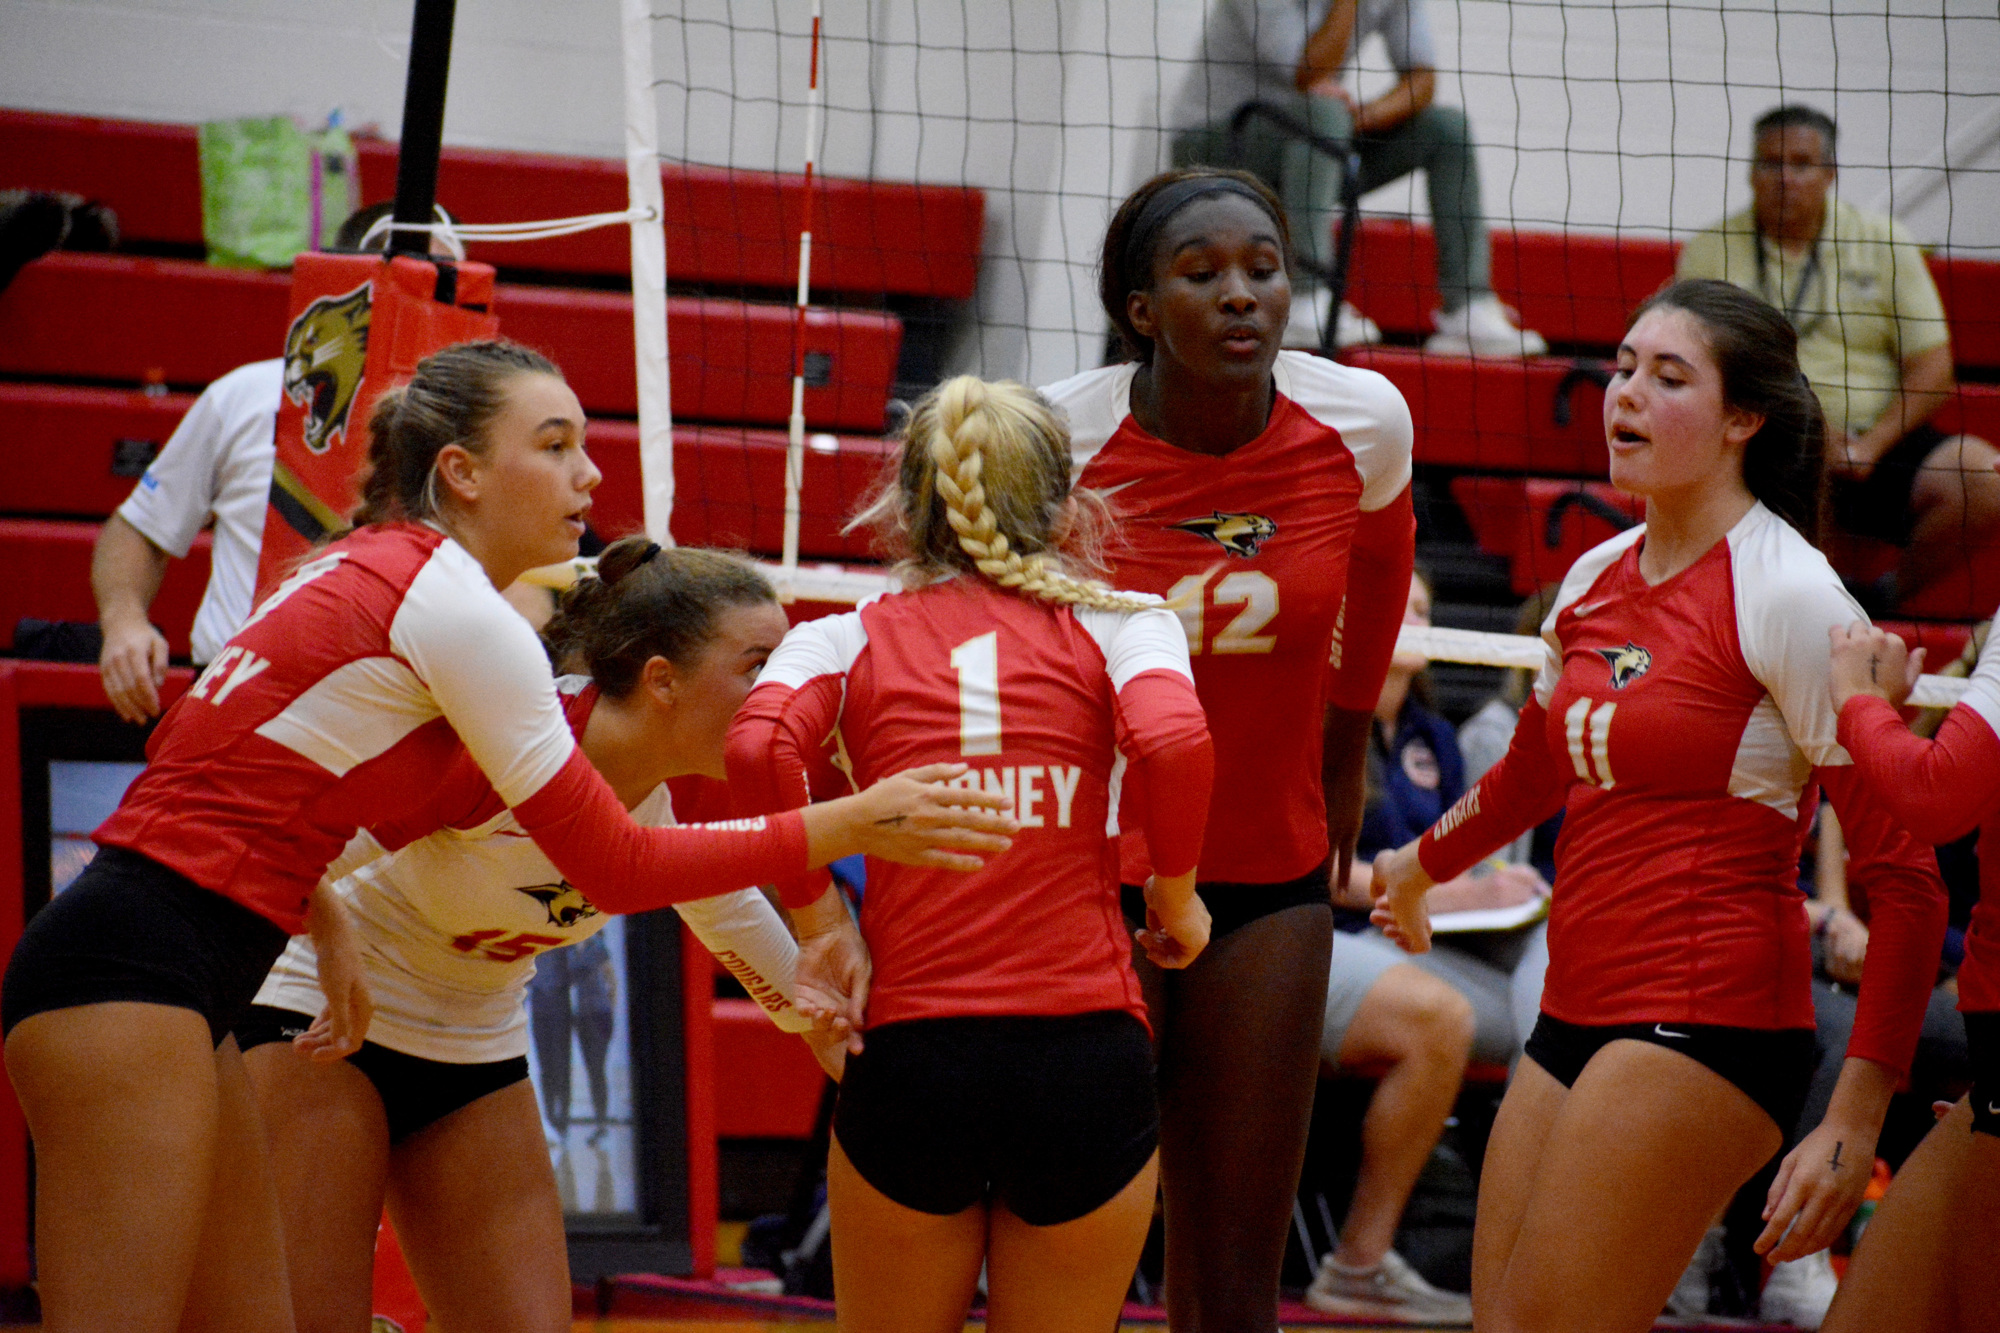 The Cardinal Mooney volleyball team comes together after winning a point against Bradenton Christian on Monday. (Photo by Ryan Kohn.)